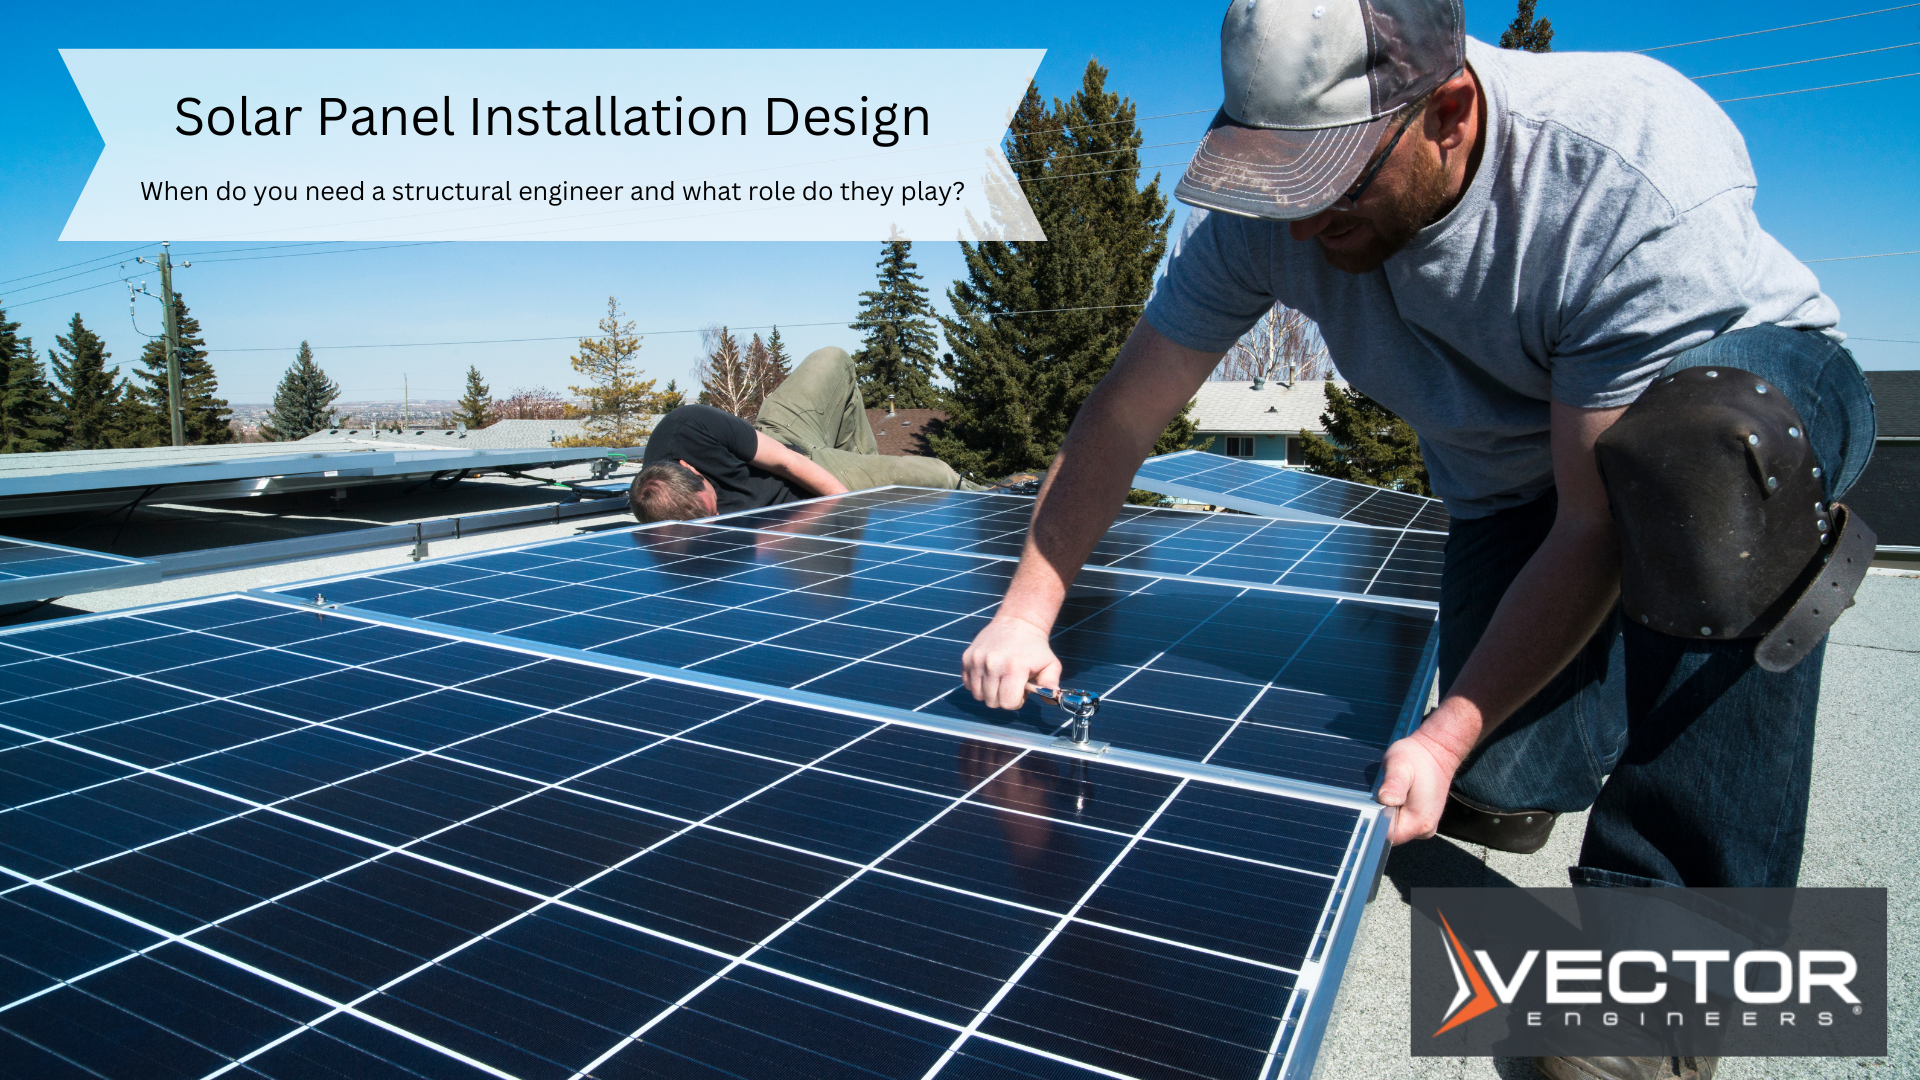 Solar Panel Installation Design: When do you need a structural engineer and what role do they play?